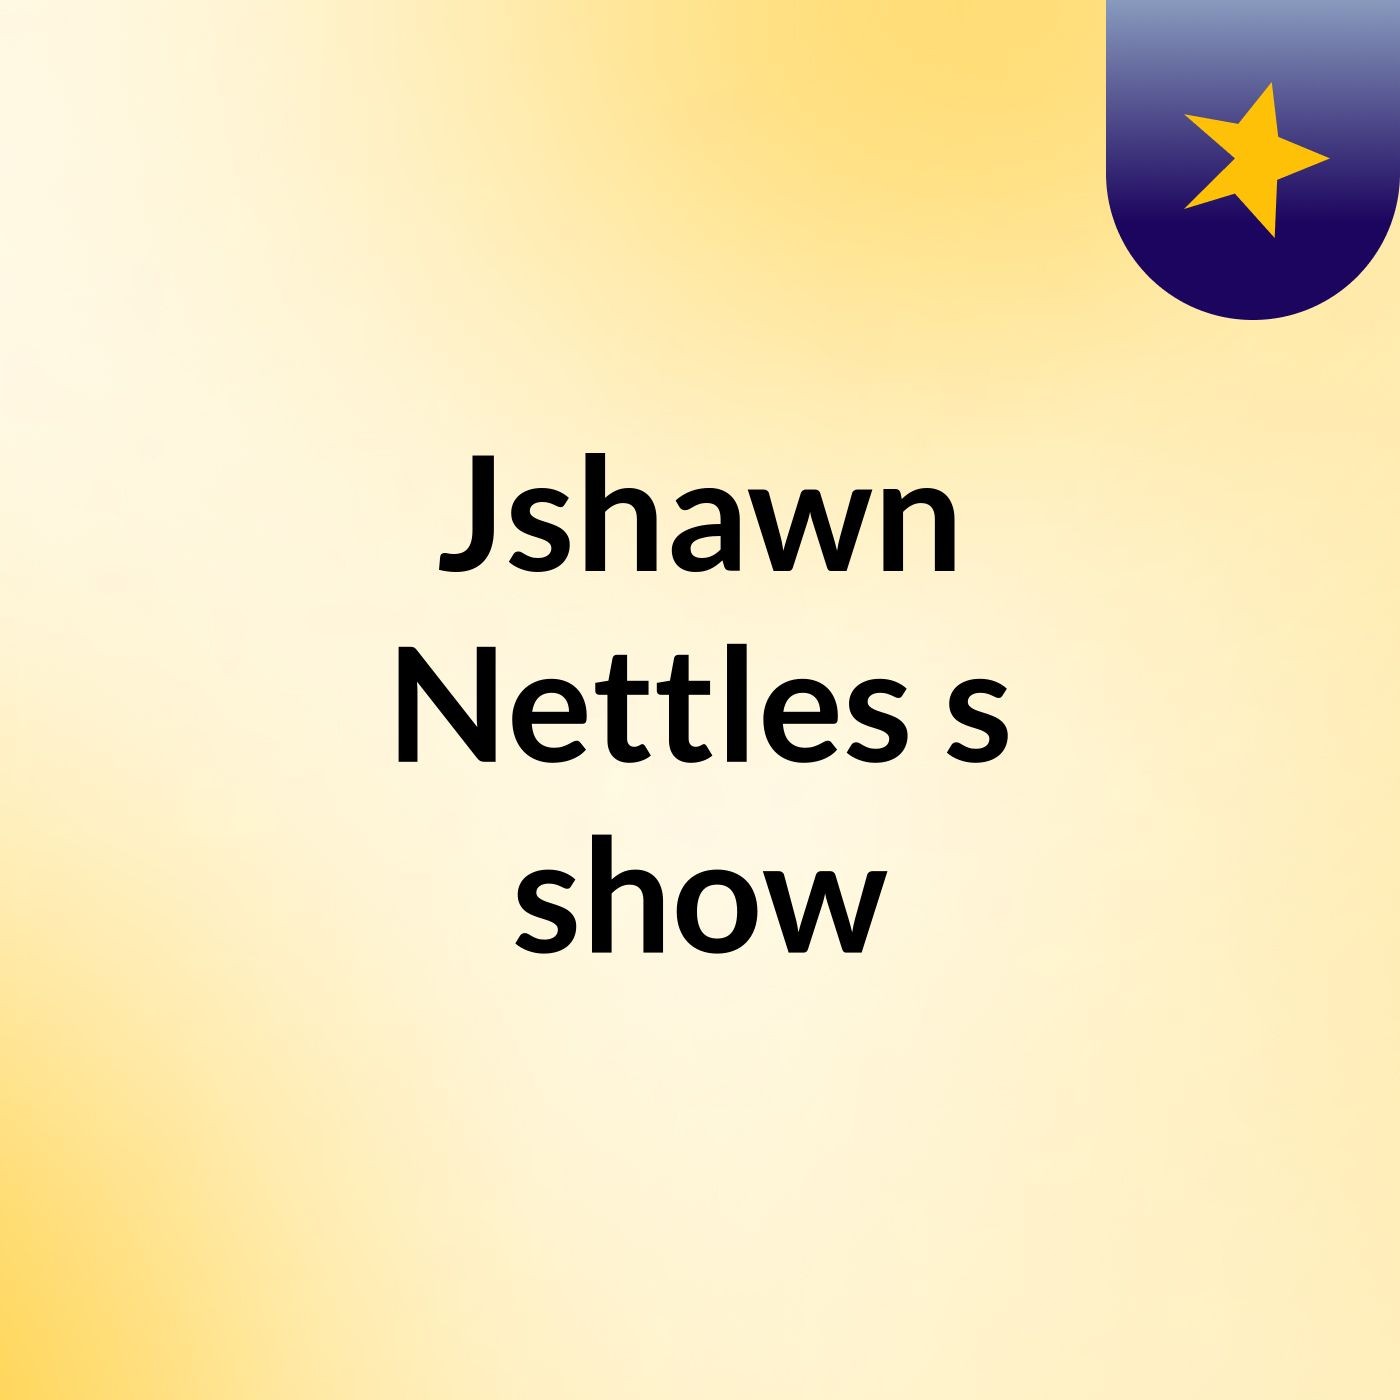 Jshawn Nettles's show